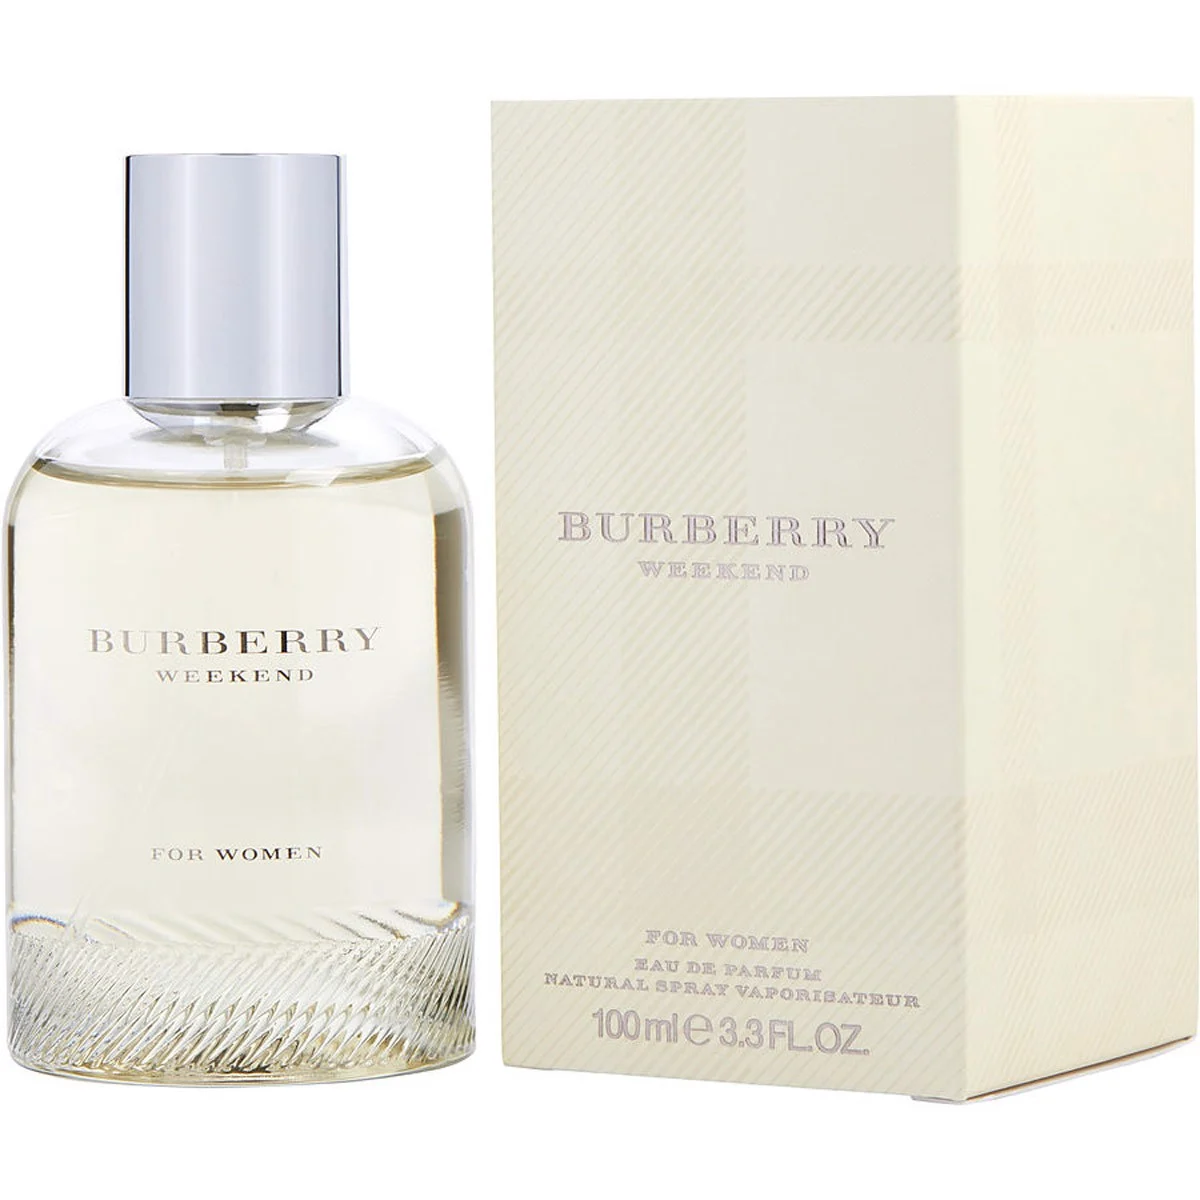 BURBERRY WEEKEND FOR WOMEN EDP